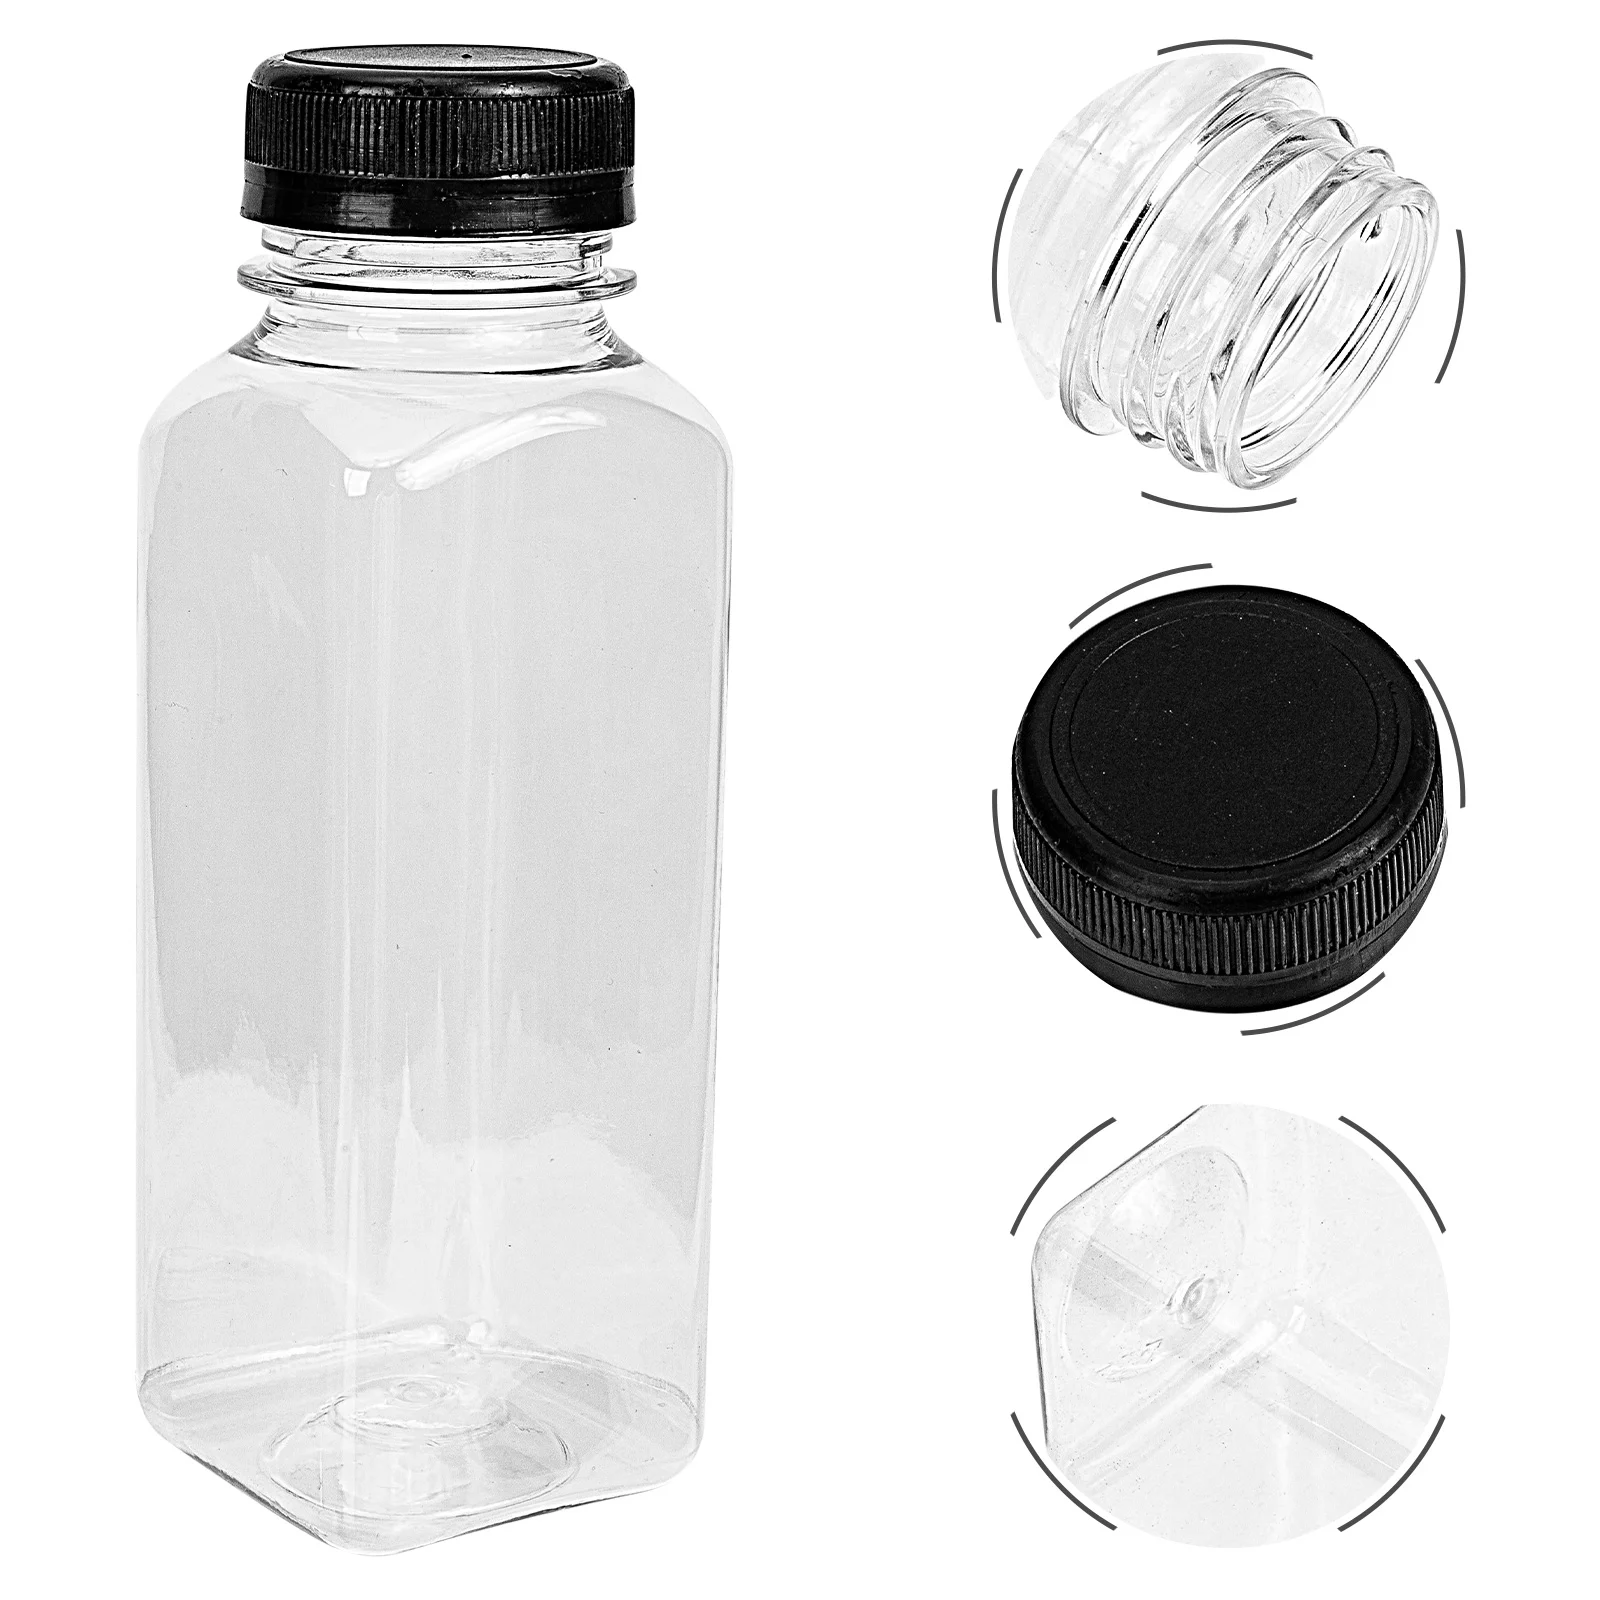 

Bottles Bottle Juicedrink Beverage Emptymilk Clear Containers Water Lidsparty Mini Drinking Jugs Container Cap Smoothie Fridge